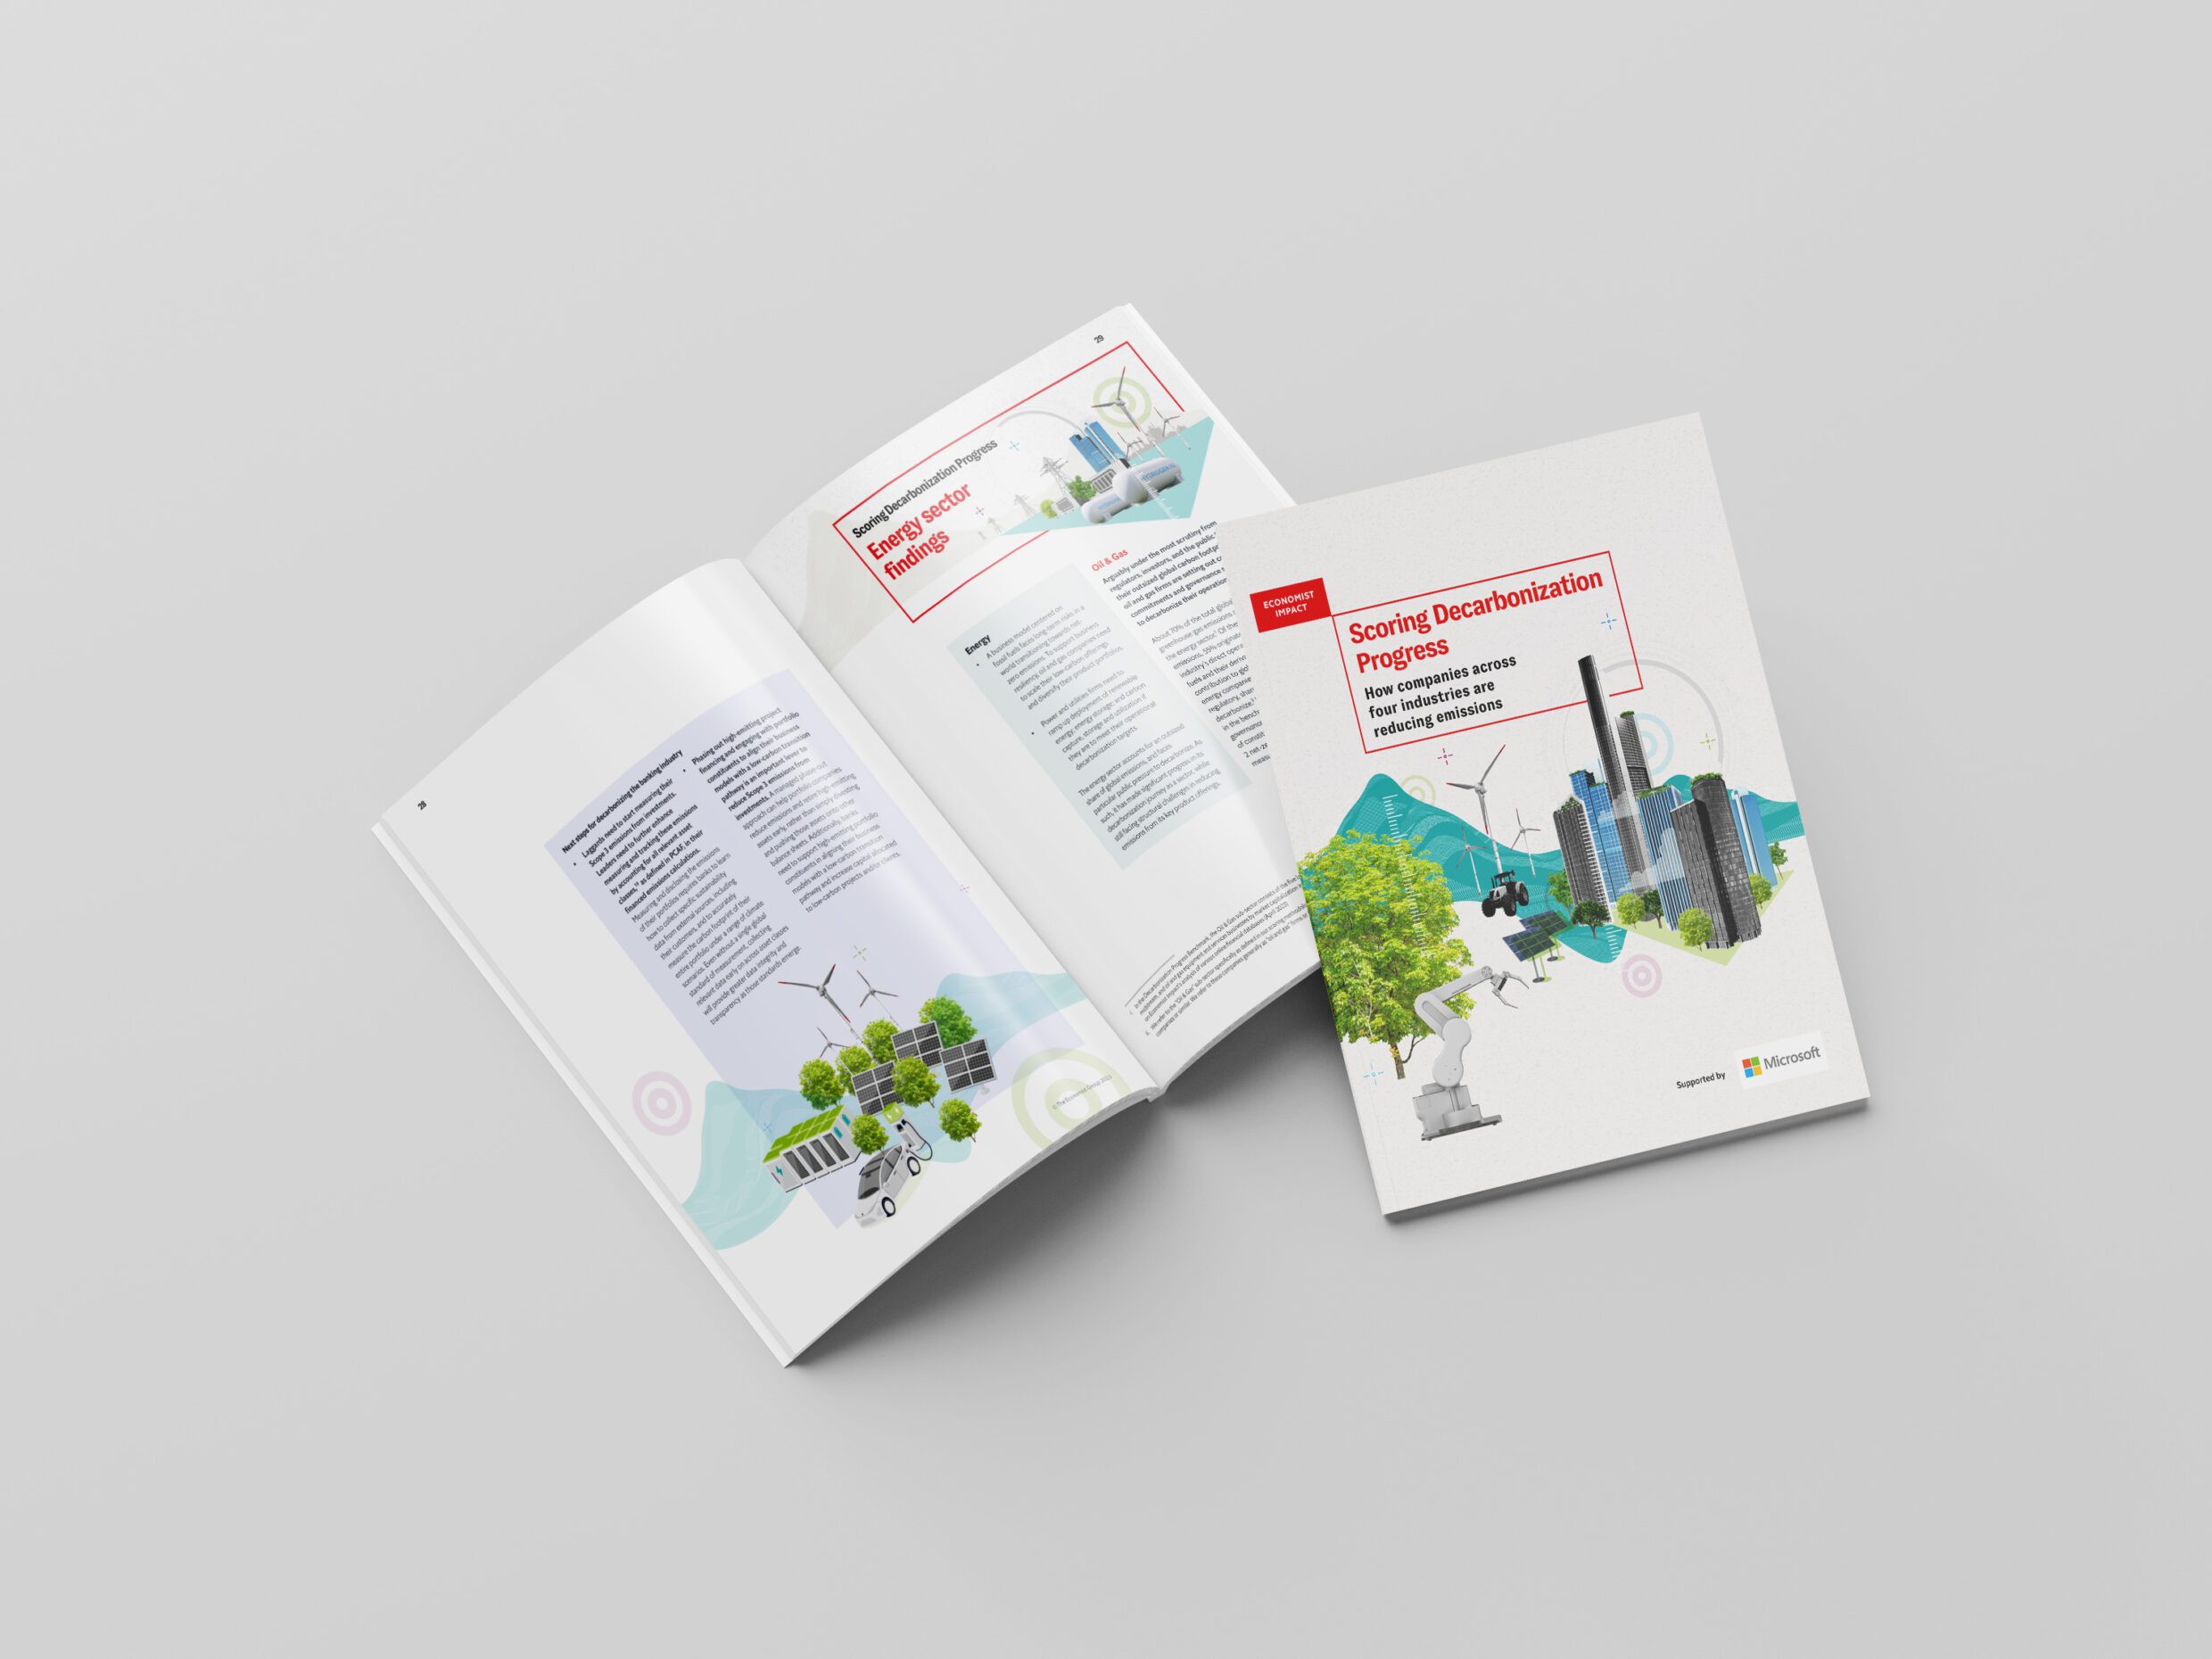 An open brochure on smart decarbonization laid out on a white surface with the cover visible on the right and an inside page on the left, showcasing industry benchmarking insights.